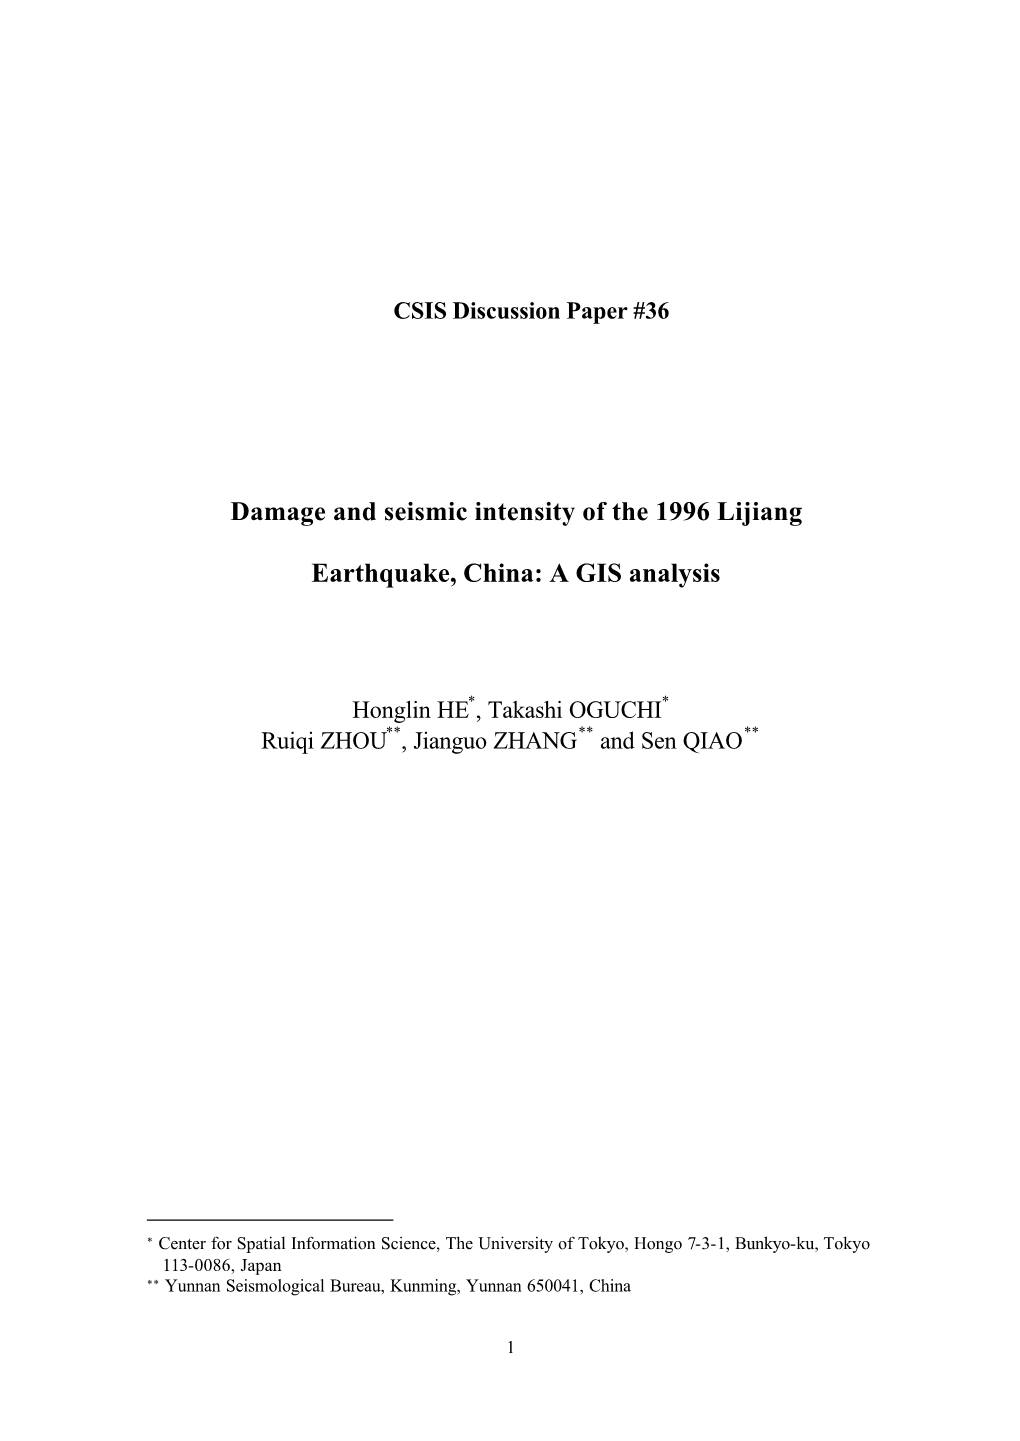 Damage and Seismic Intensity of the 1996 Lijiang Earthquake, China: A